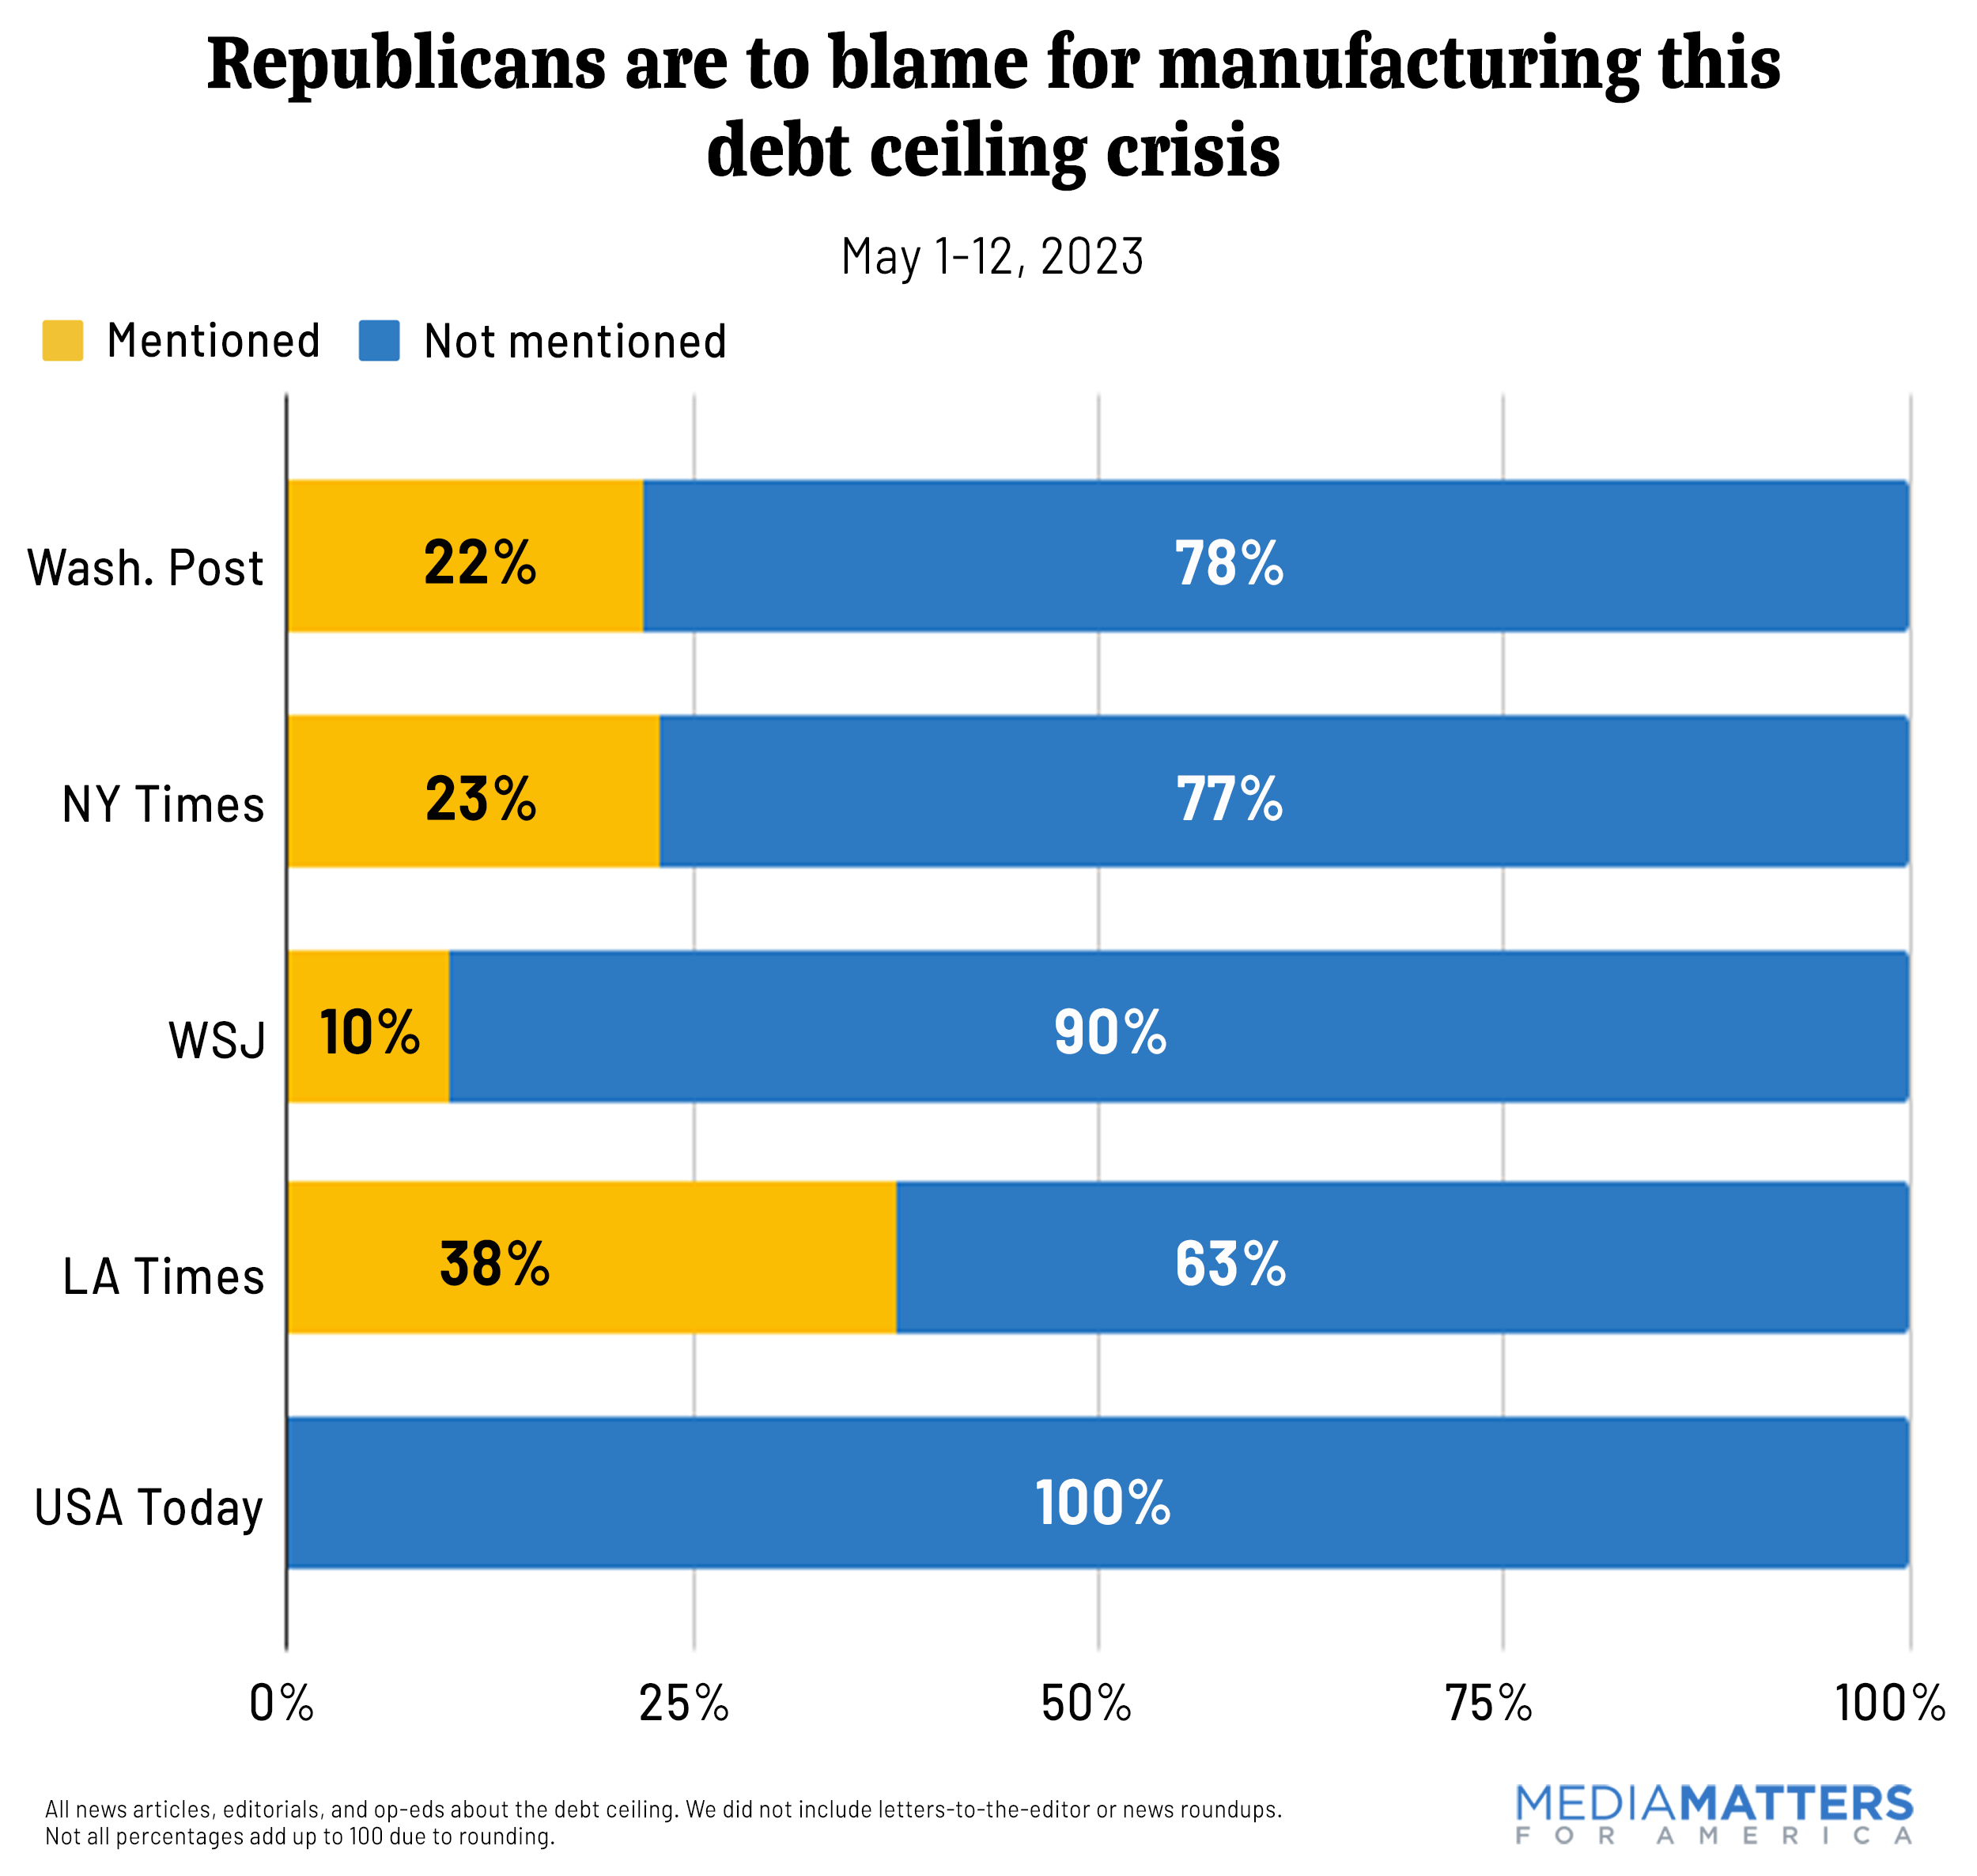 Republicans are to blame for manufacturing this debt ceiling crisis